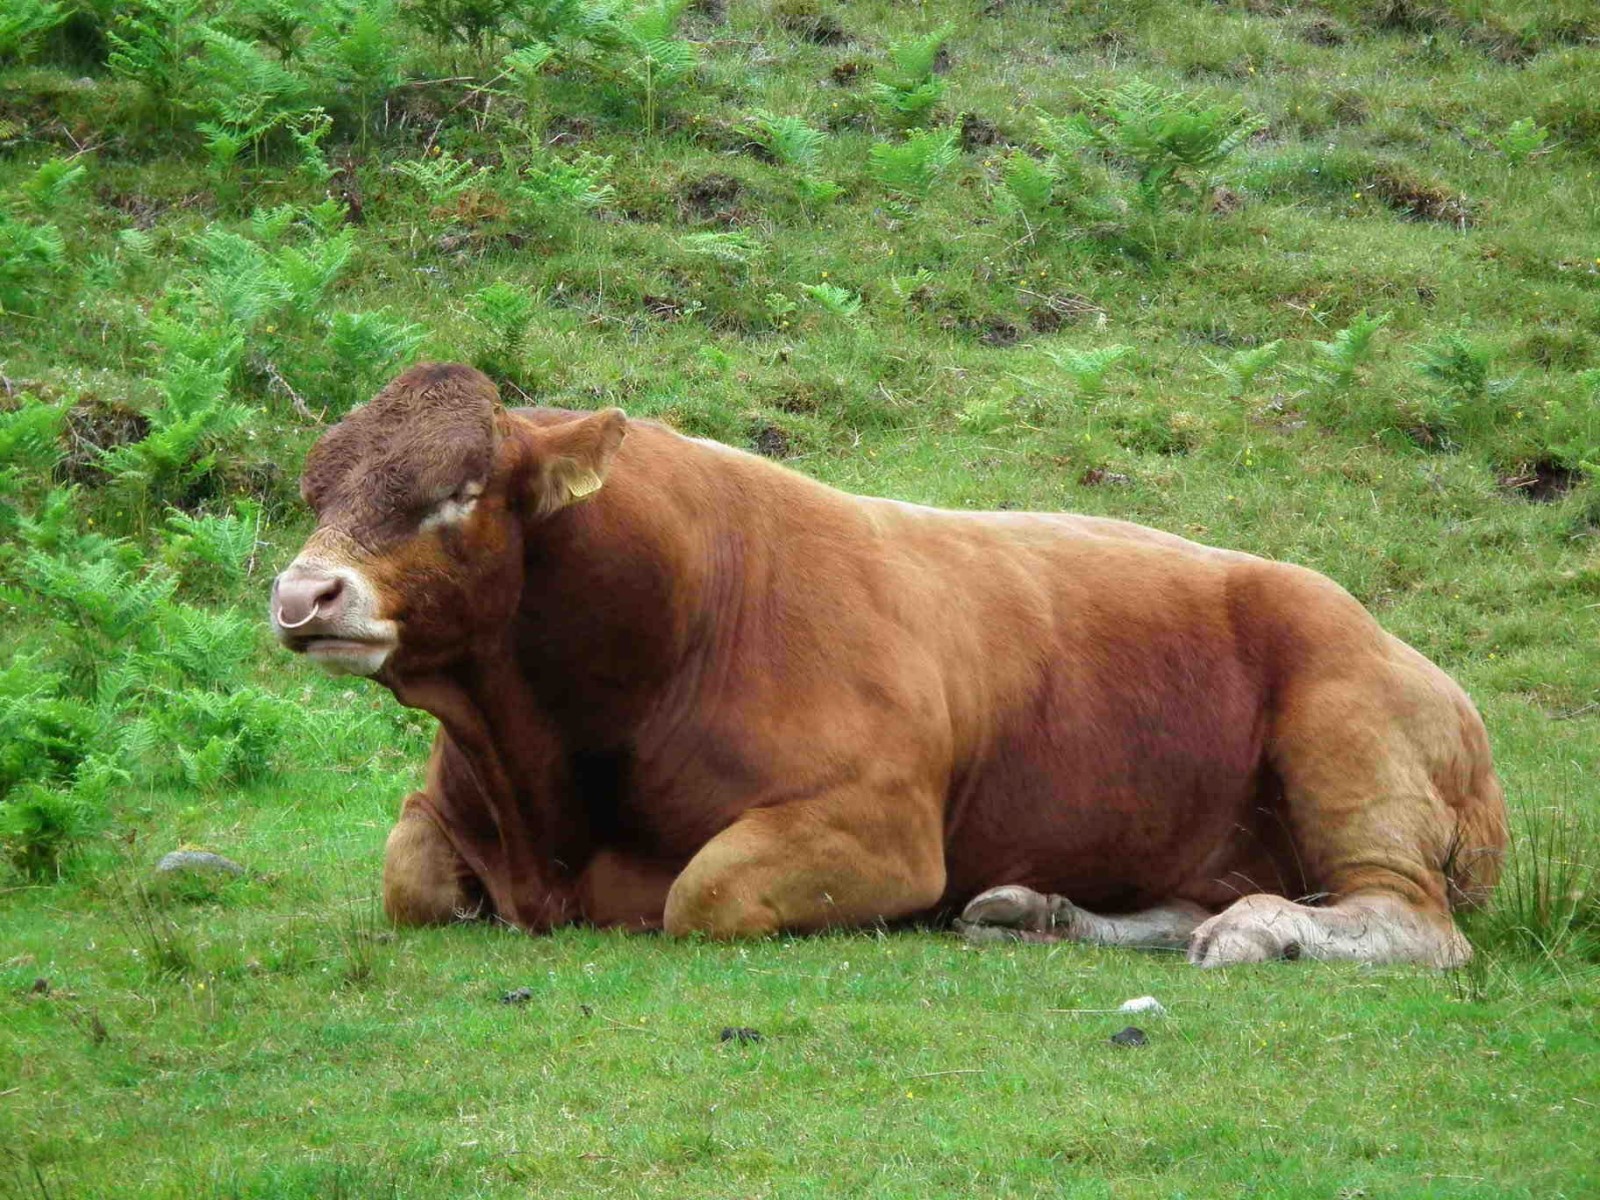 A Load Of Bull, Cattle | Bull | Animal | Scotland | Brown